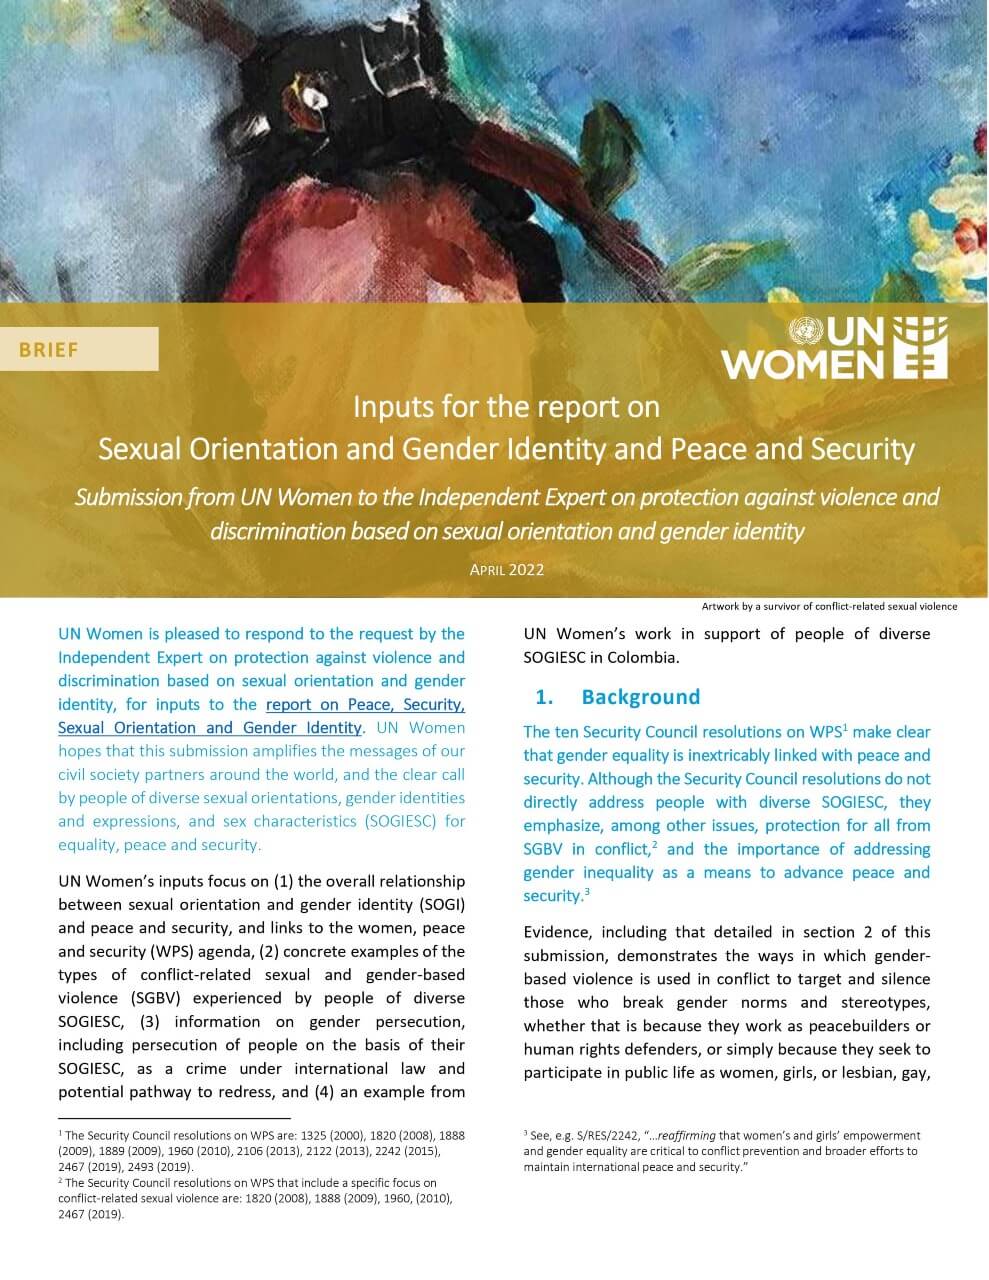 Inputs for the Report on Sexual Orientation and Gender Identity and Peace and Security: Submission from UN Women to the UN Independent Expert on protection against violence and discrimination based on sexual orientation and gender identity